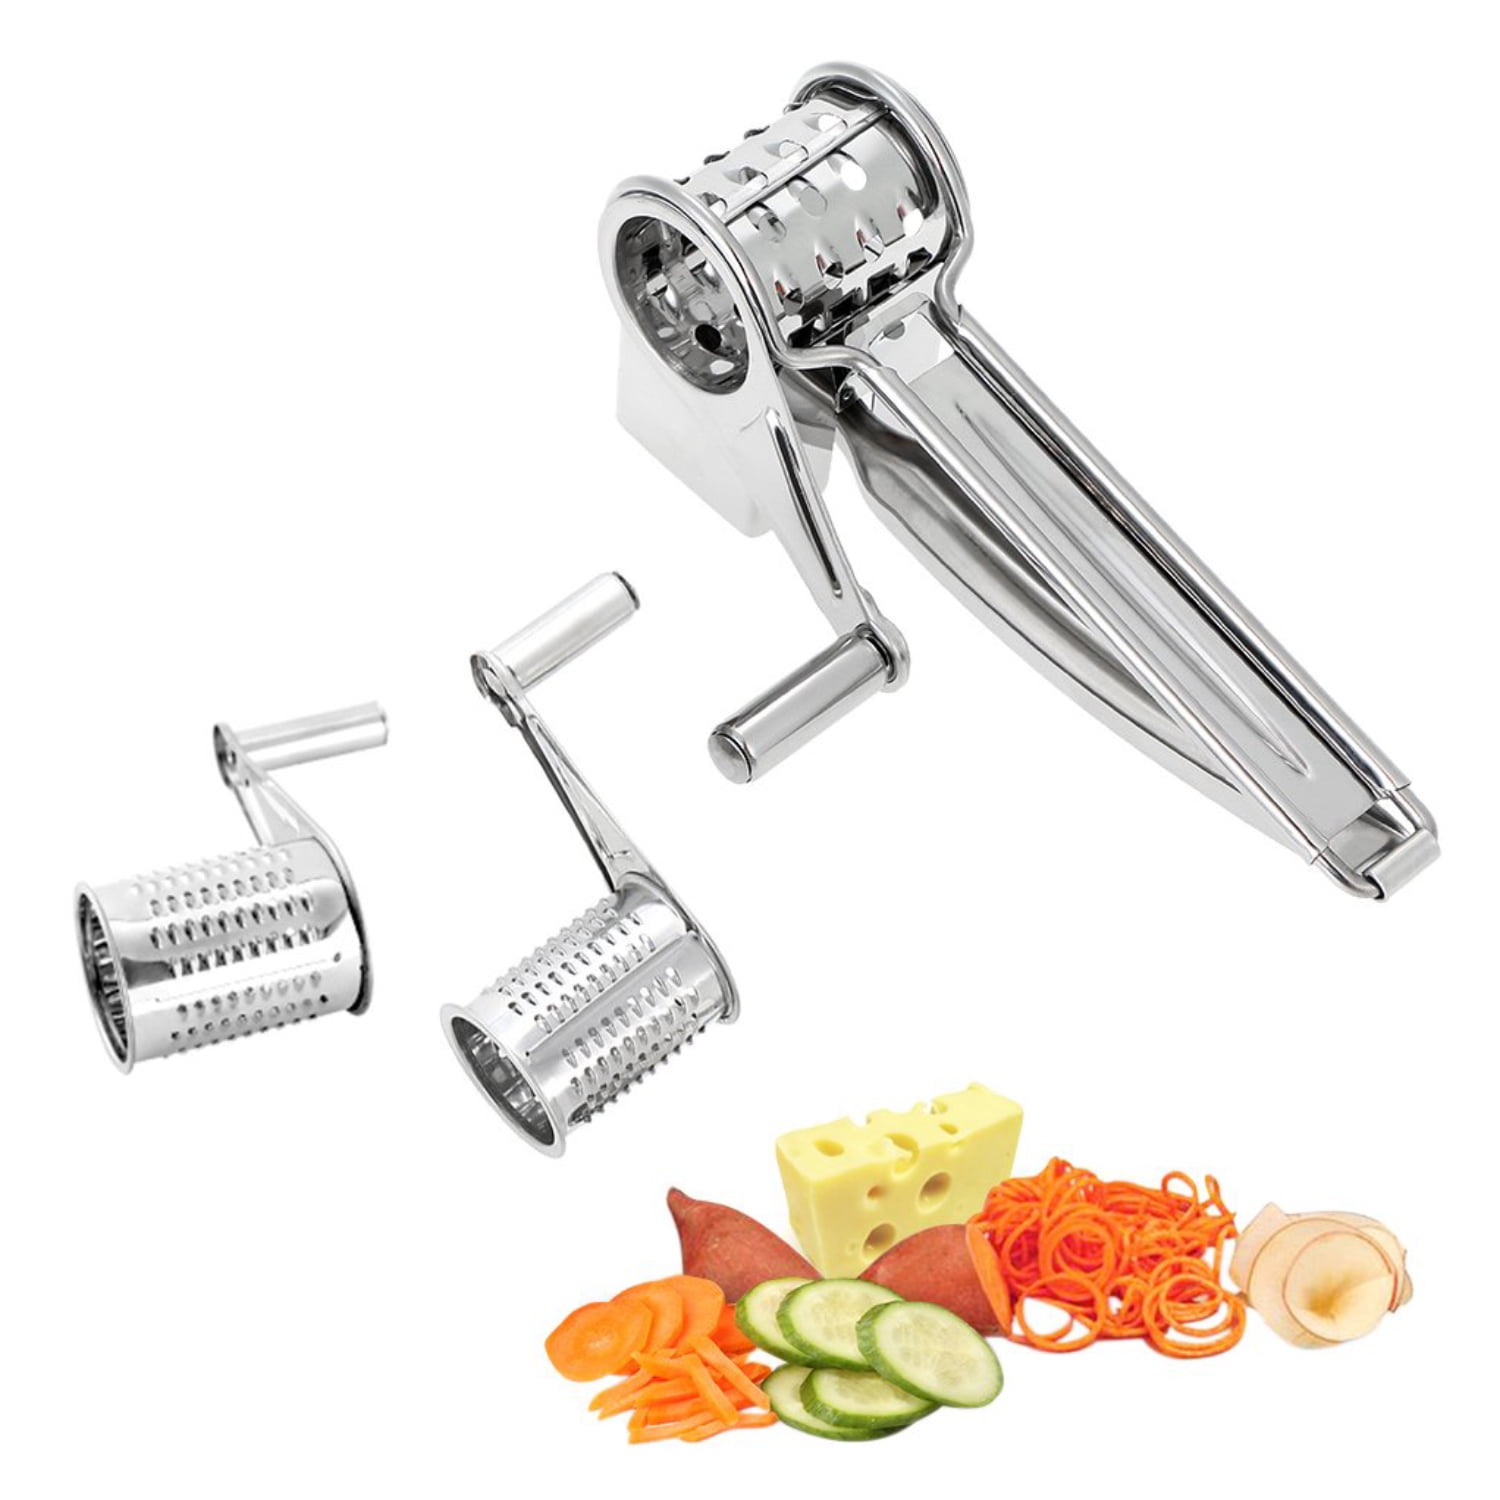 JLLOM Rotary Cheese Grater with 3 Drum Blades,Stainless Steel Manual Handheld  Cheese Grater Shredder Cutter for Grating Hard Cheese Chocolate Nuts  Almonds 